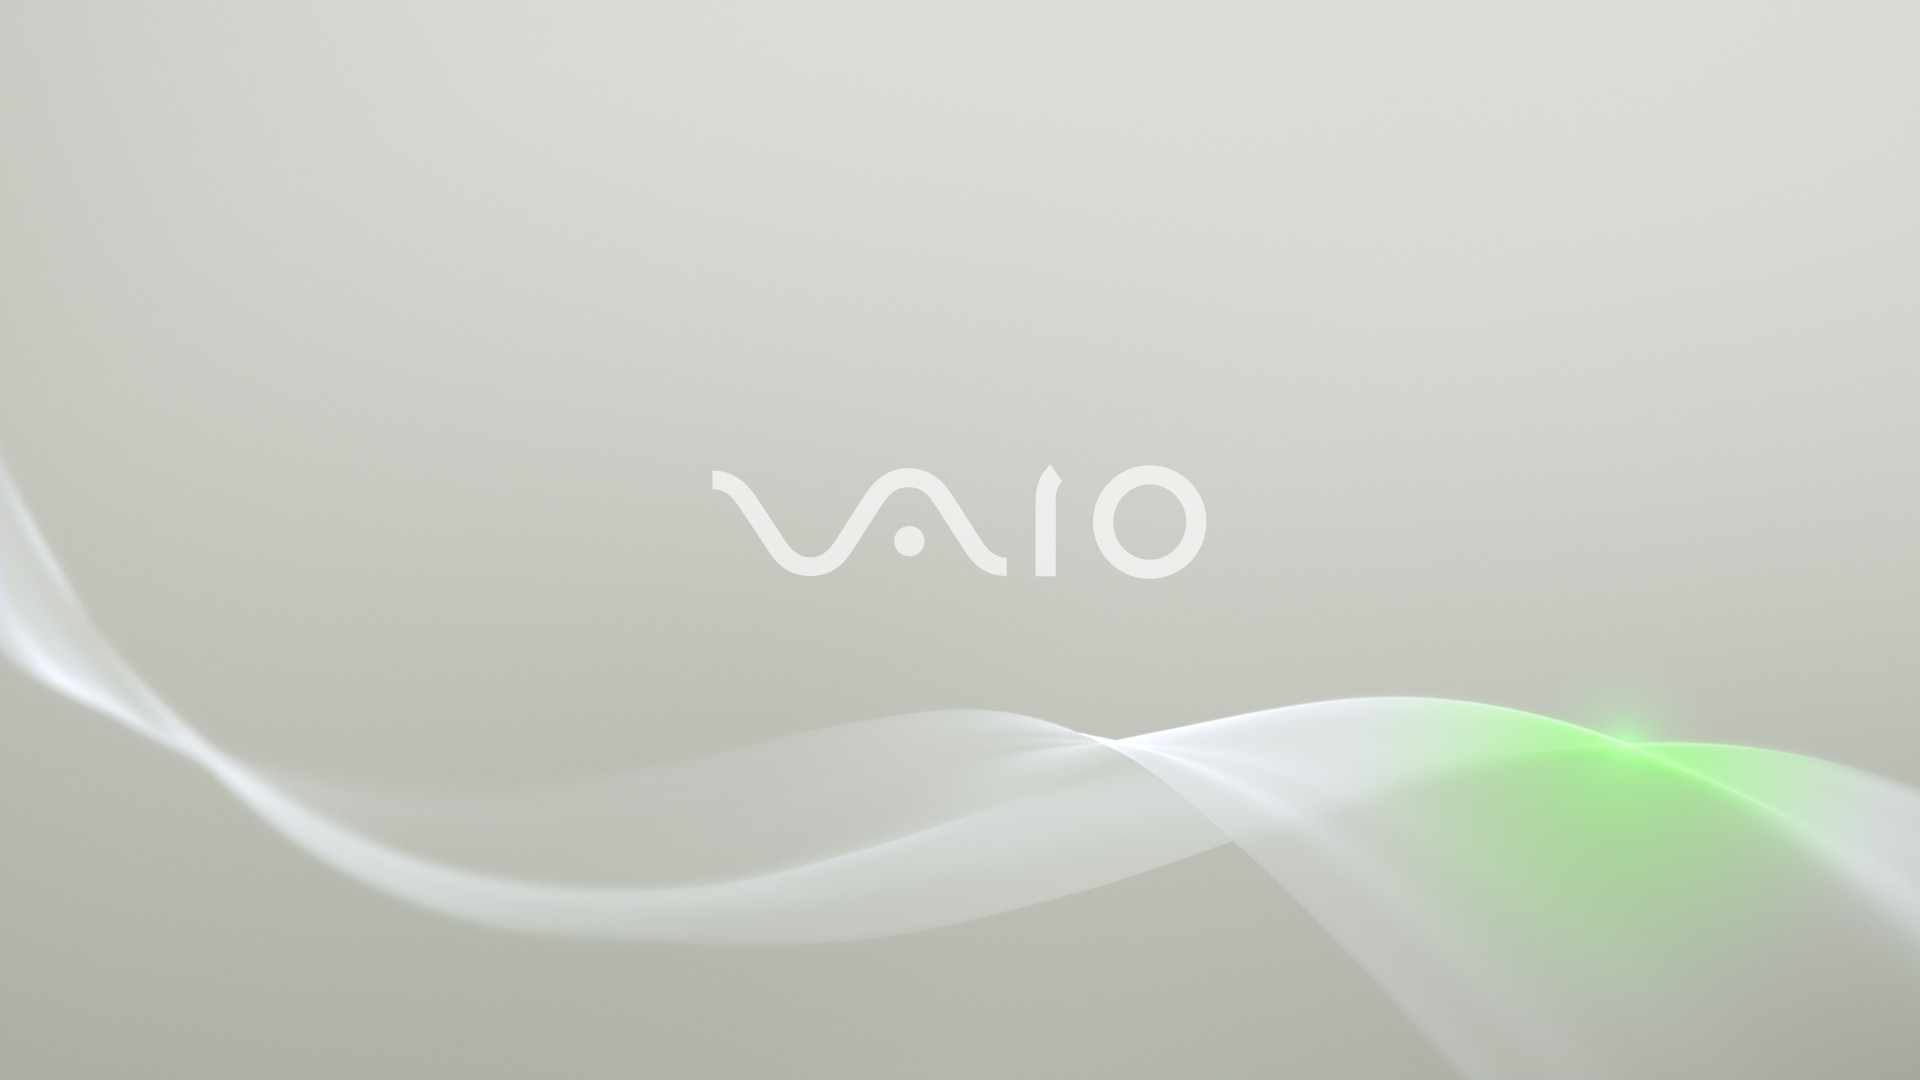 1920x1080 HD Sony Vaio Wallpapers & Vaio Backgrounds For Free Download